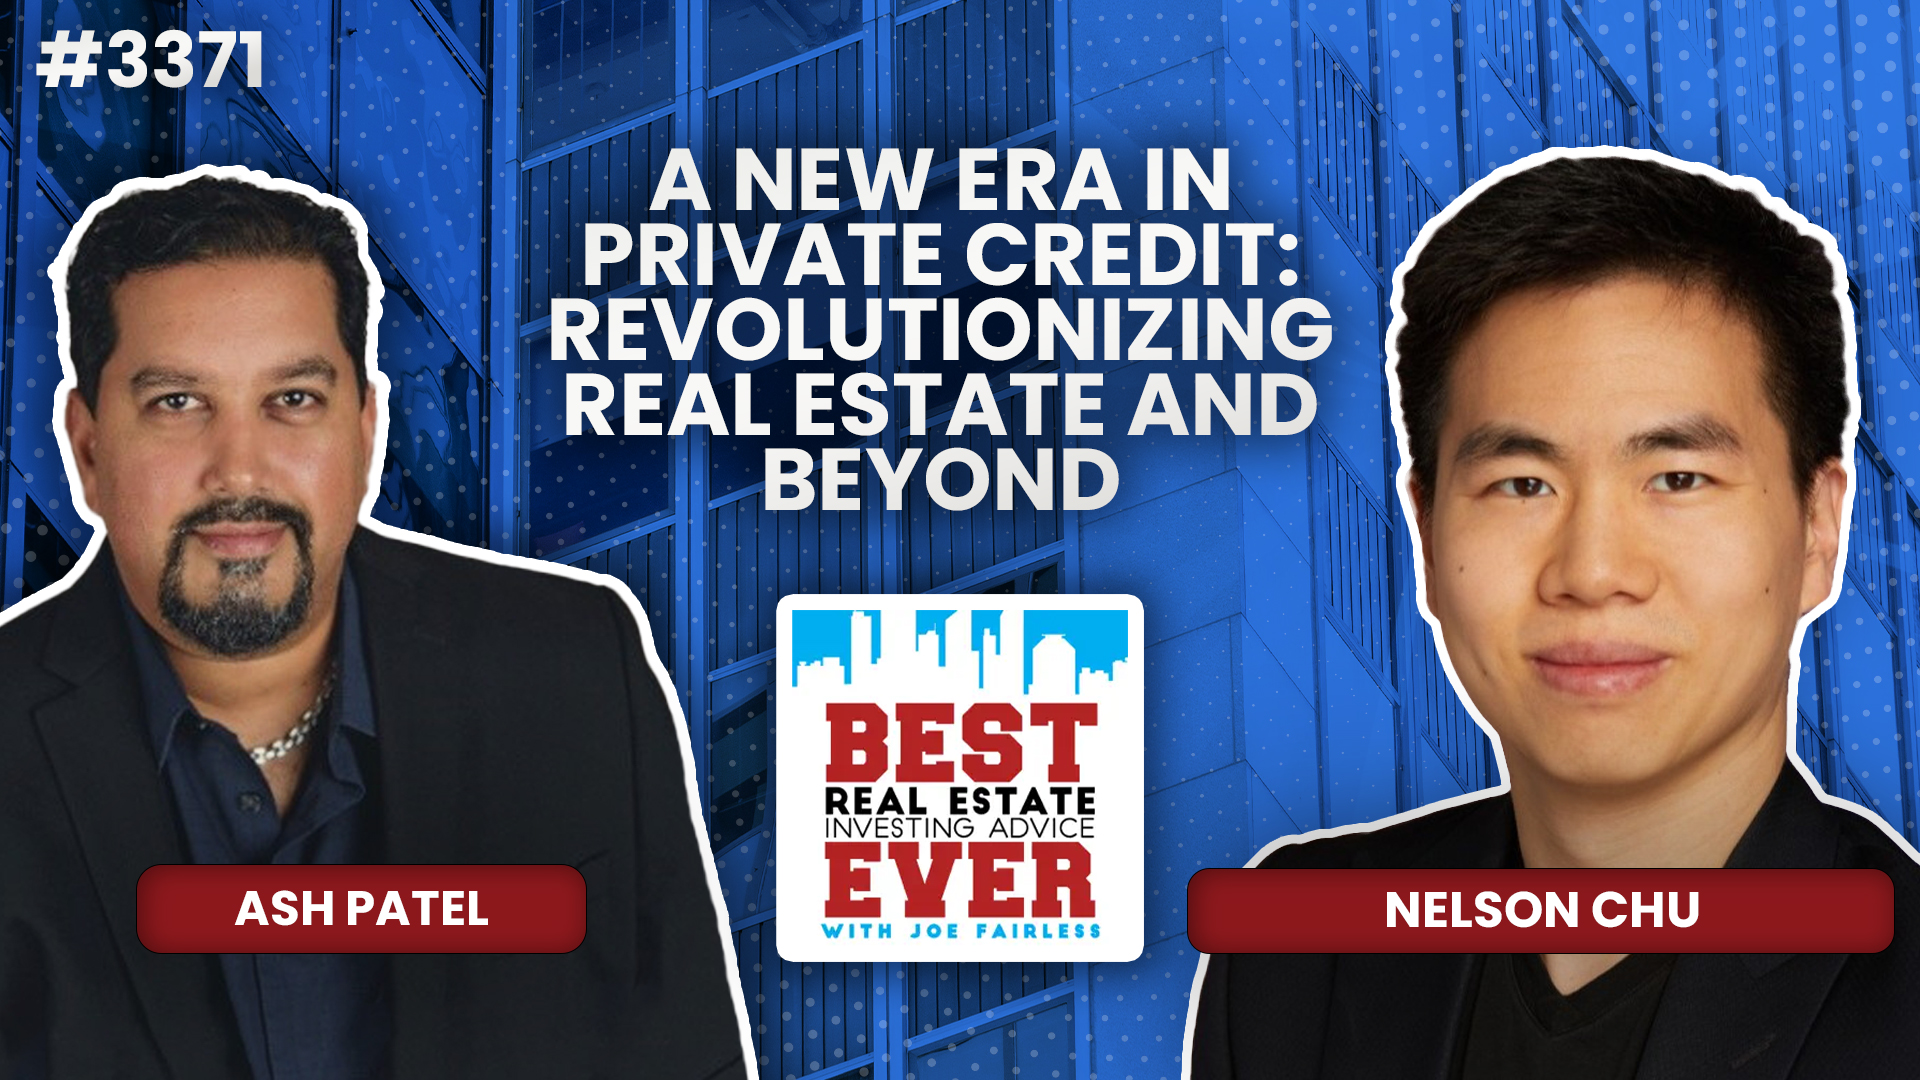 JF3371: Nelson Chu - A New Era in Private Credit: Revolutionizing Real Estate and Beyond